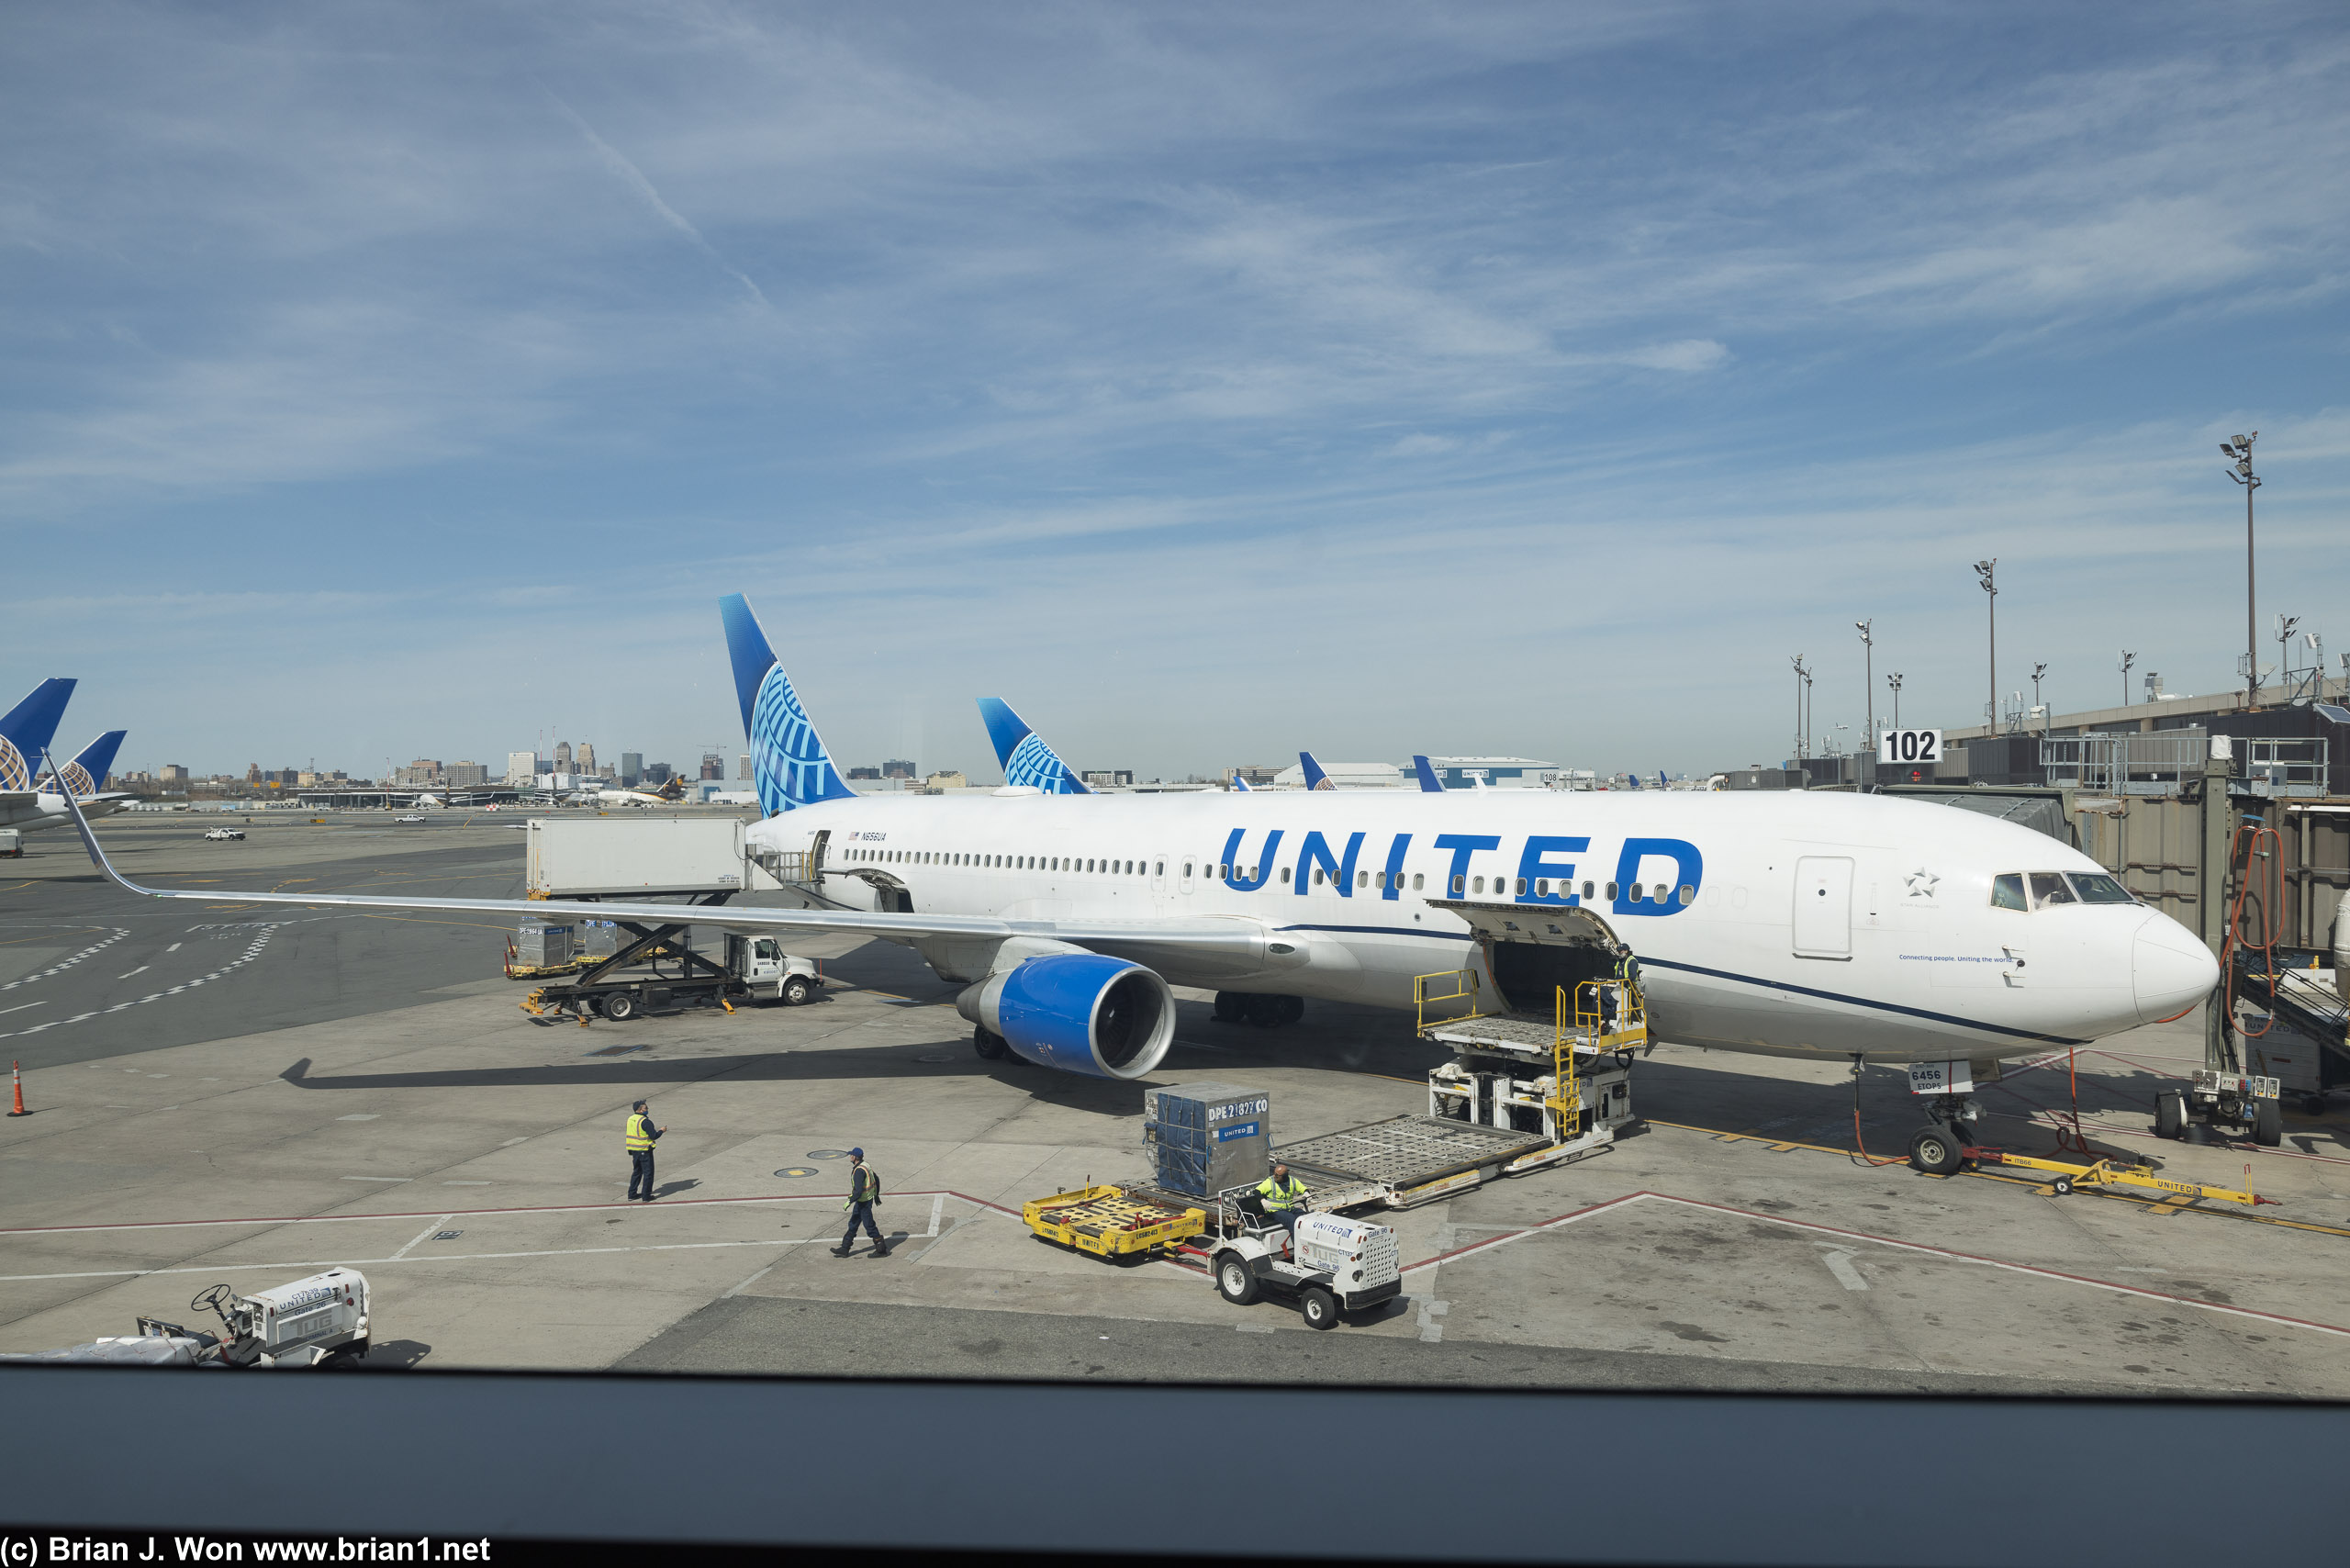 United always has 767-300's parked at this gate.